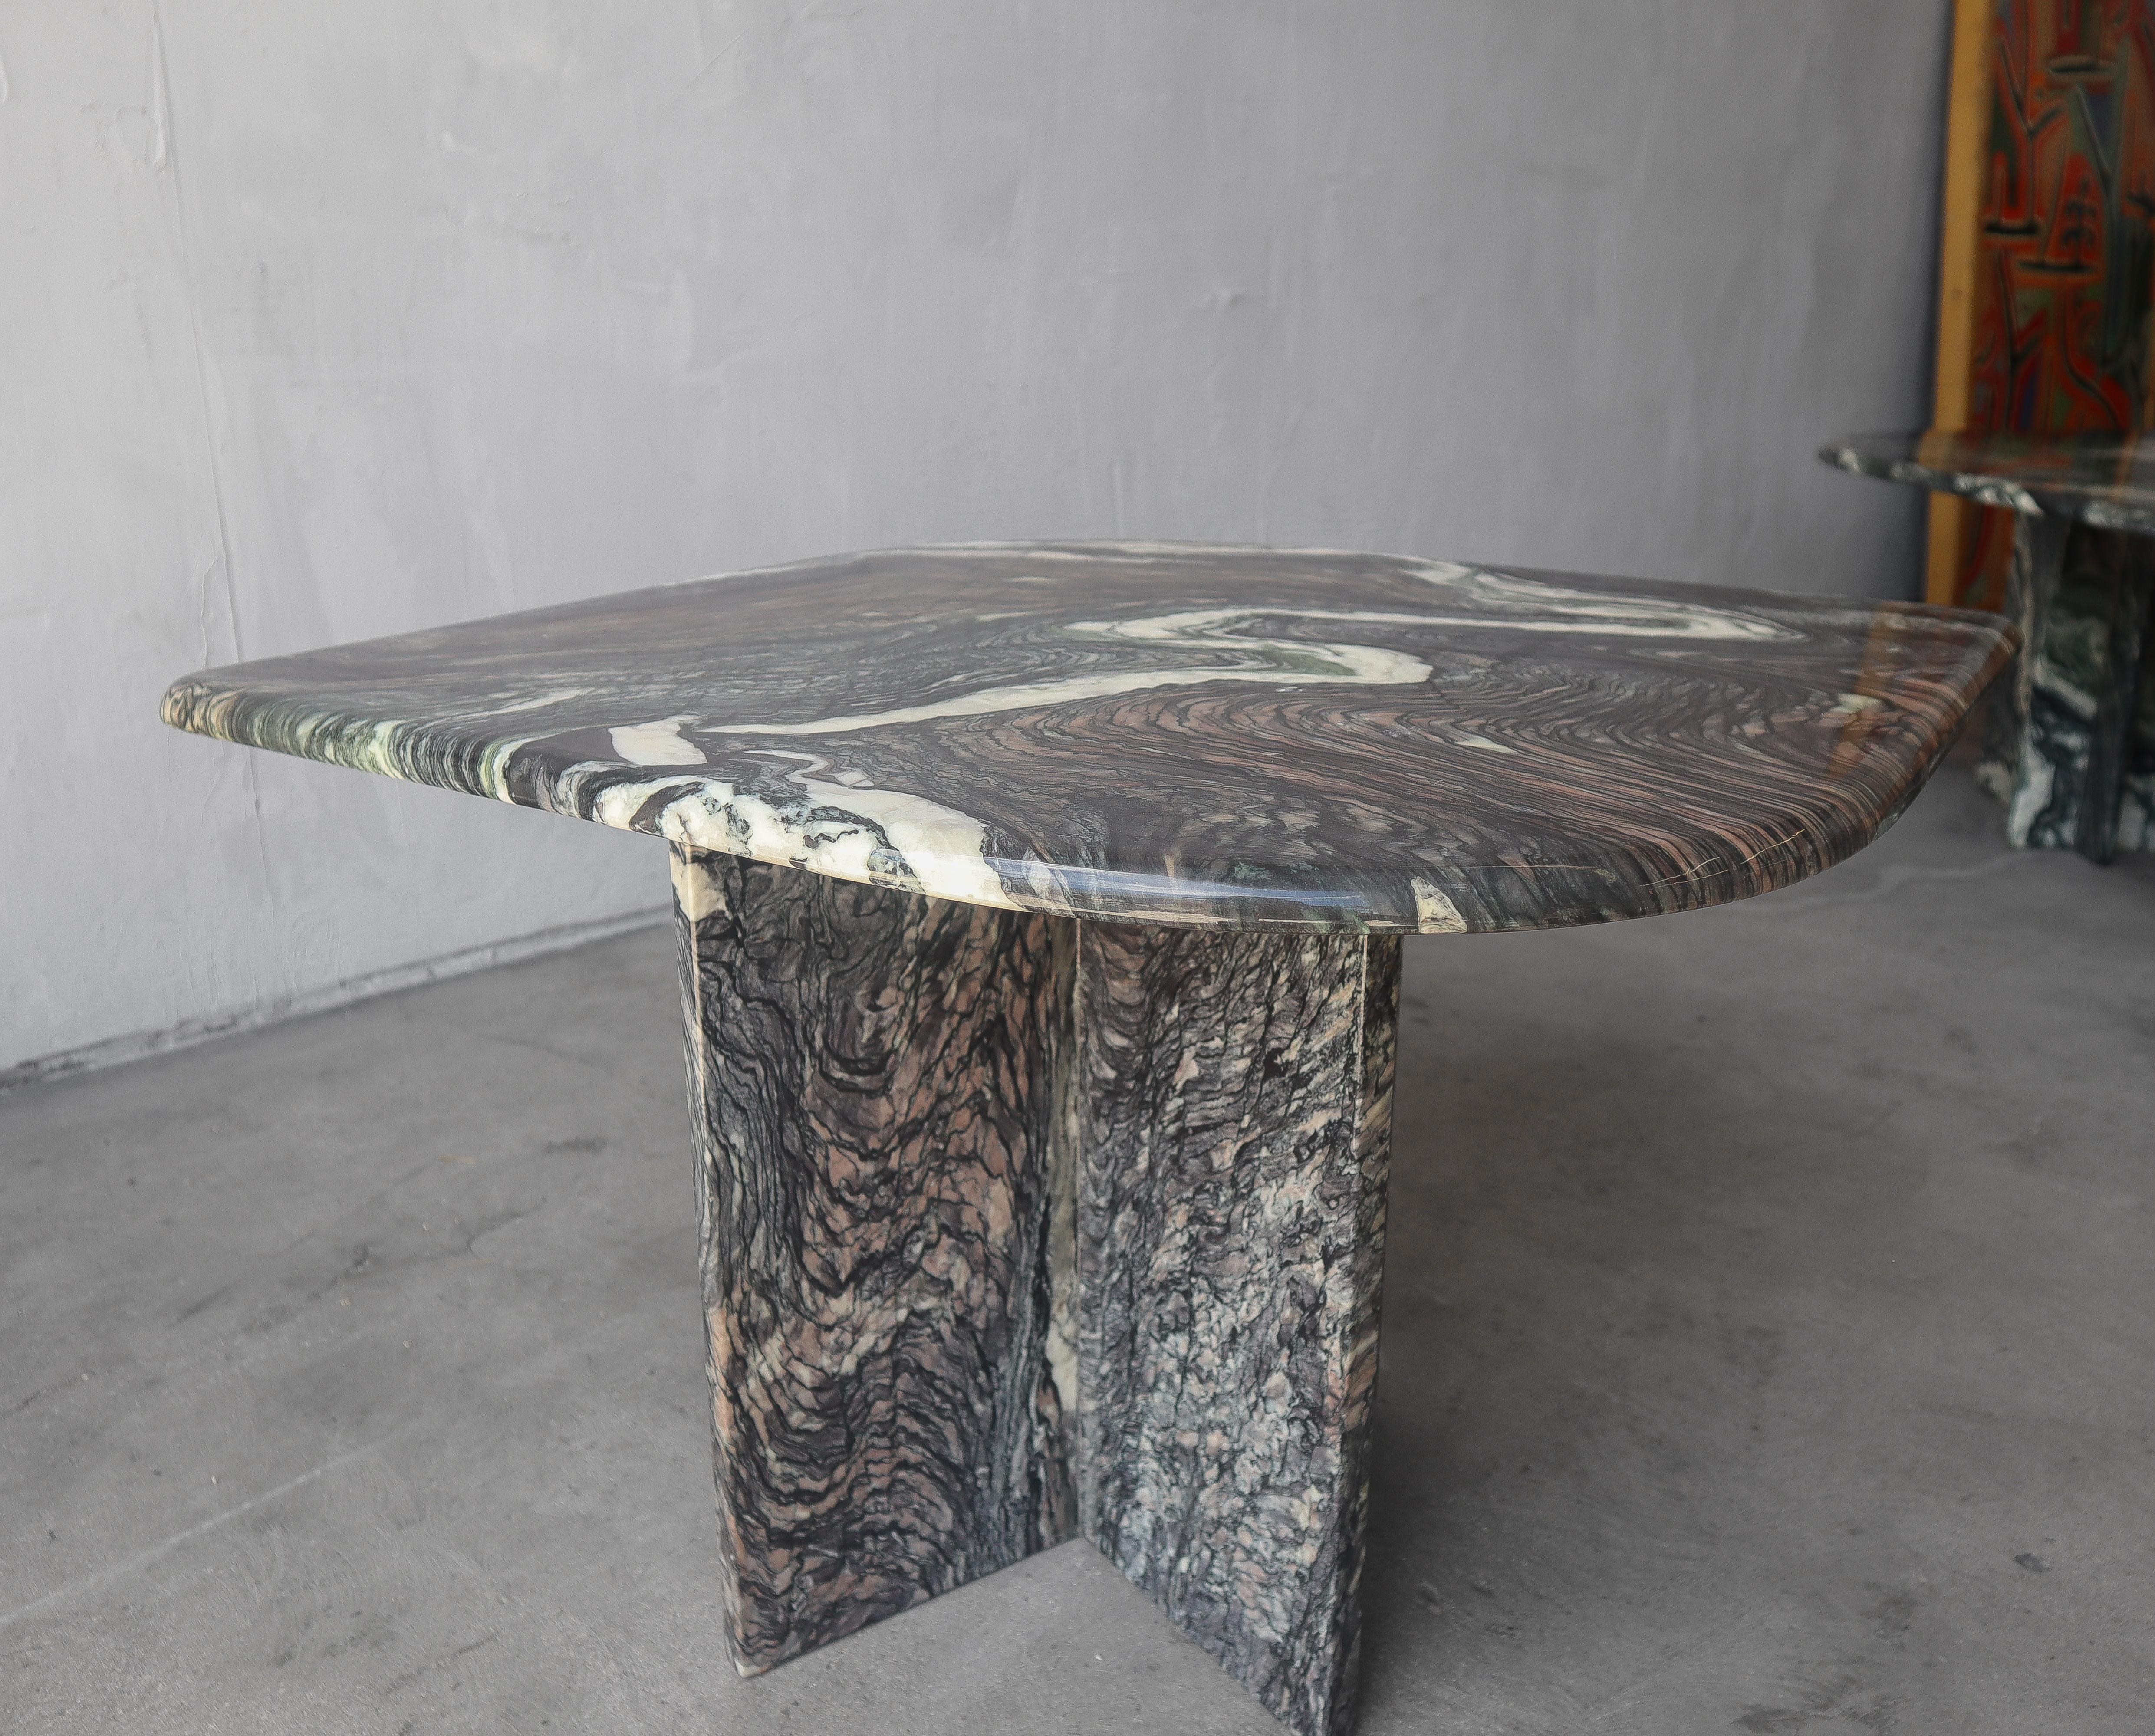 Beautiful Post Modern, swirled marble side table on a t-shape pedestal base. 

Table is in excellent condition with minimal wear to the finish from age and use. There is one small chip in the finish, see last image other than that there are no chips